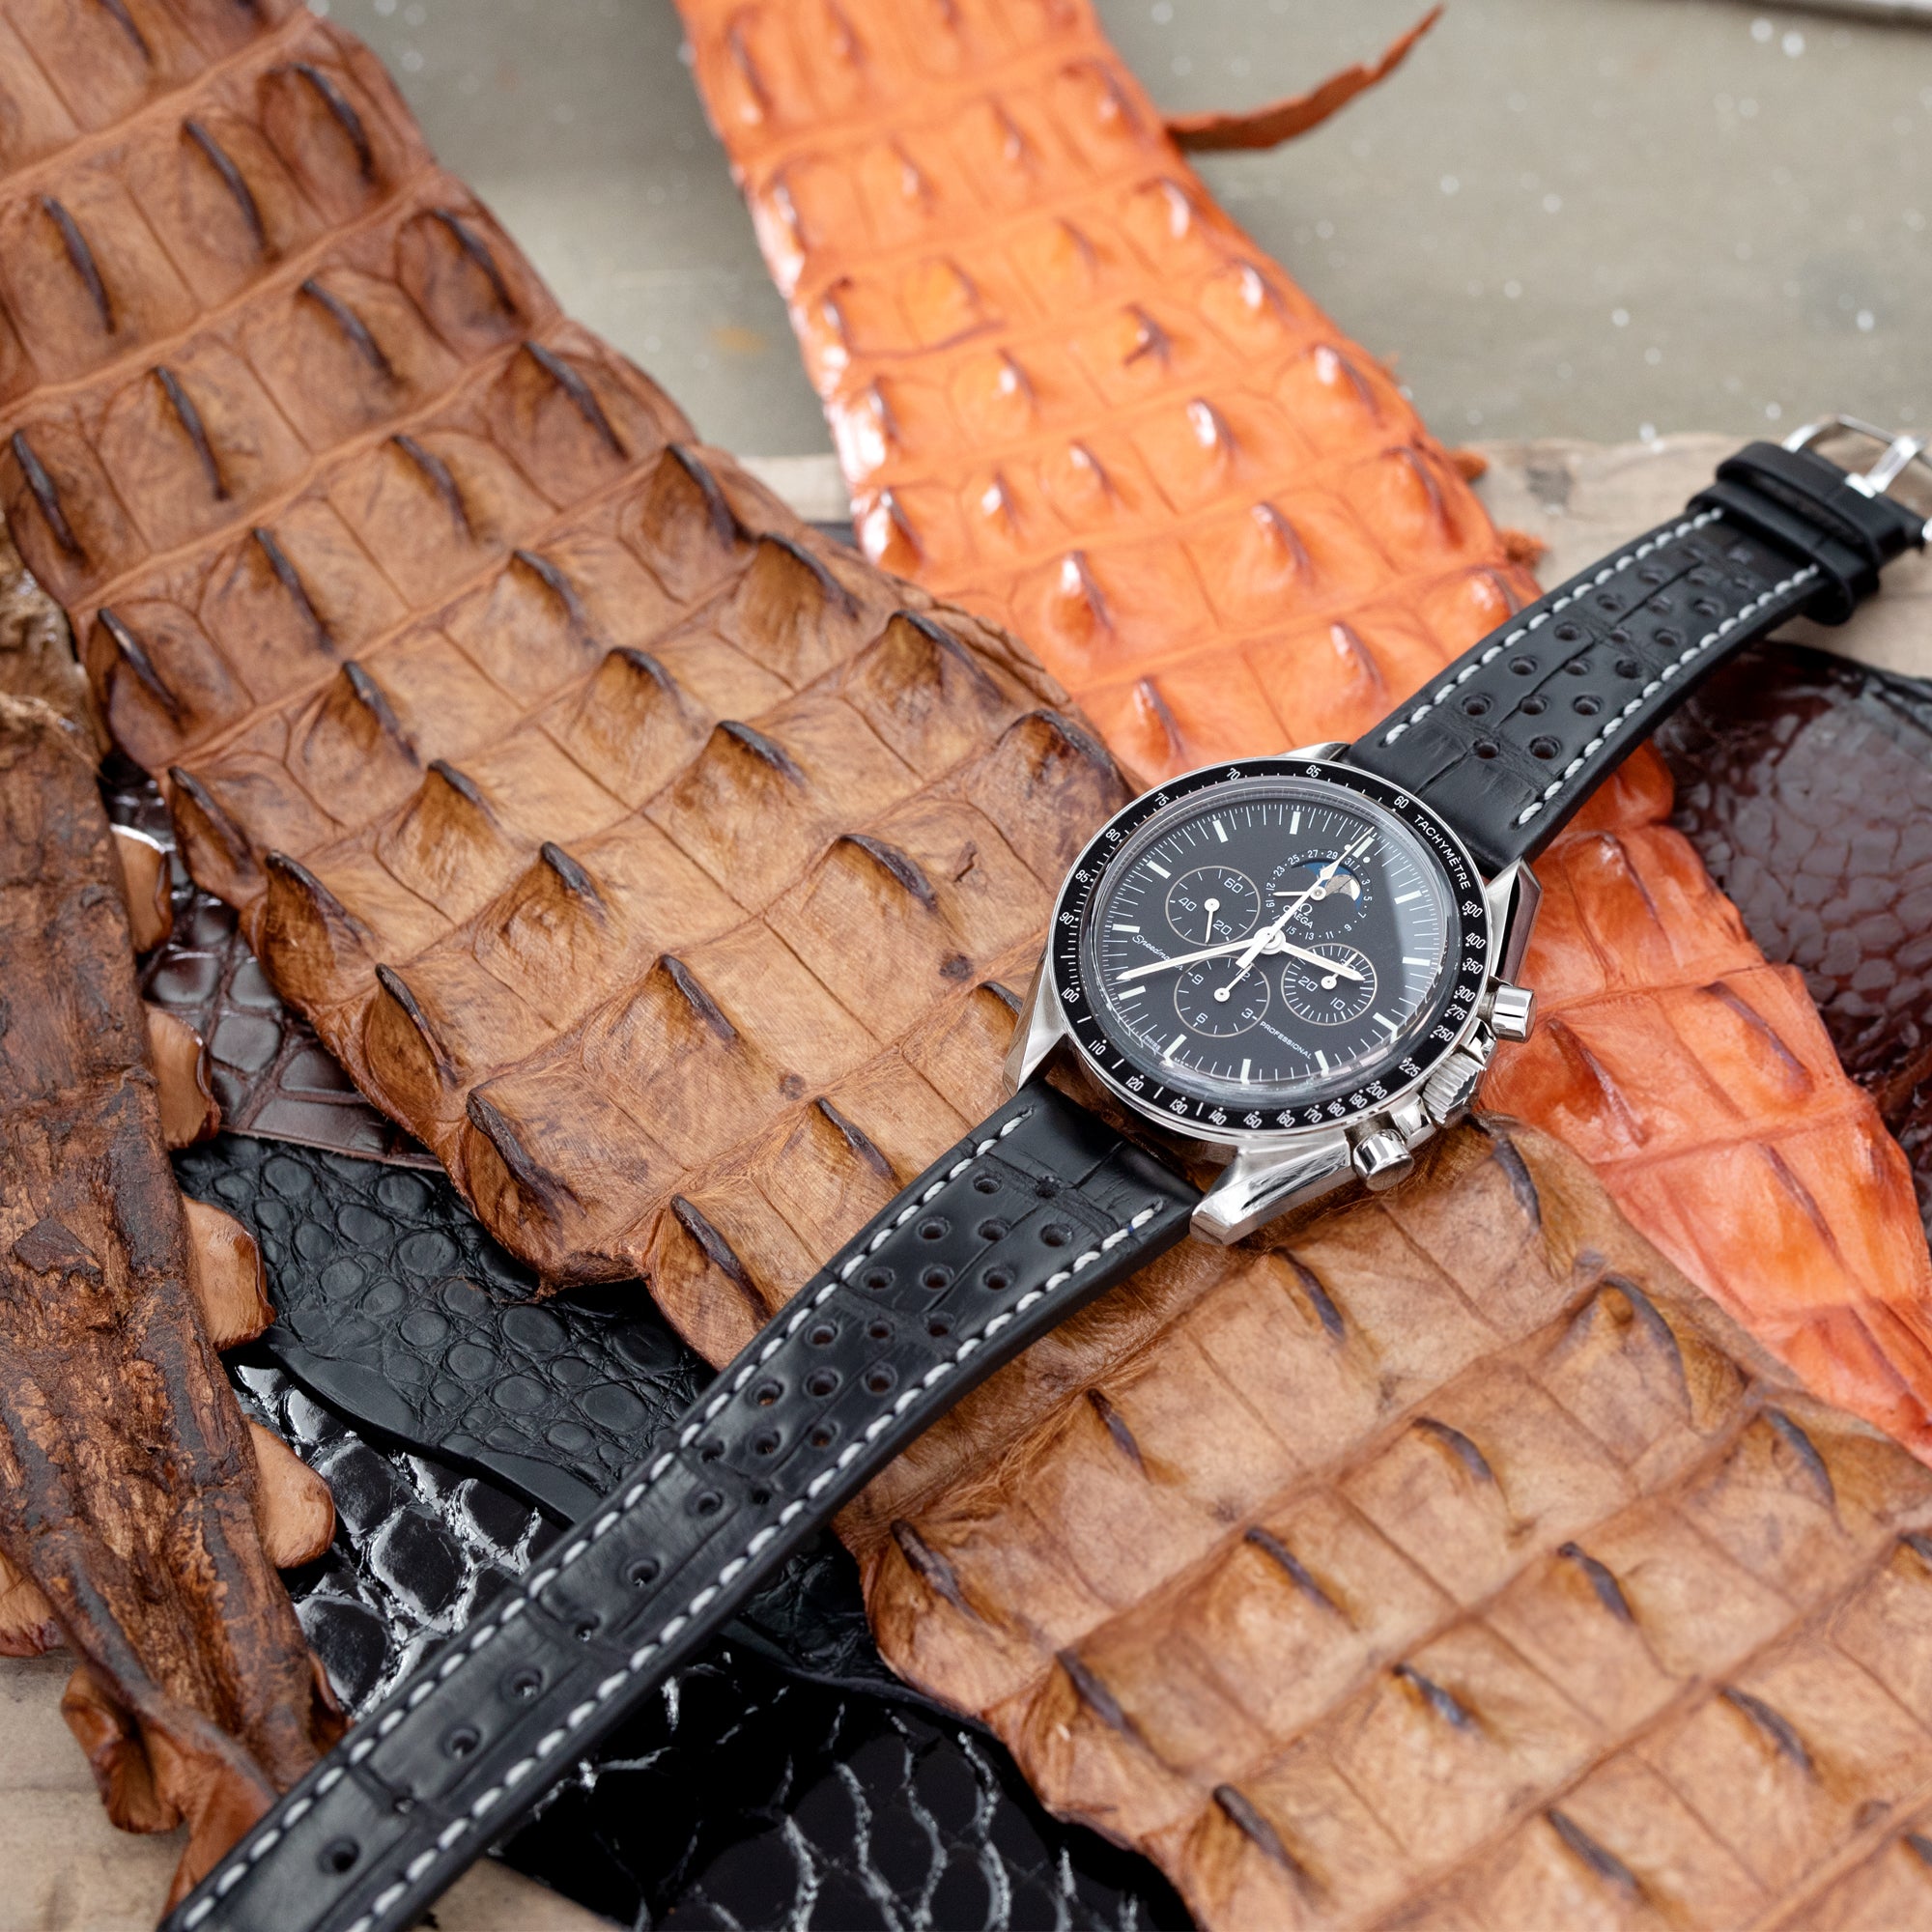 Alligator Leather is The Perfect Durable Watch Strap